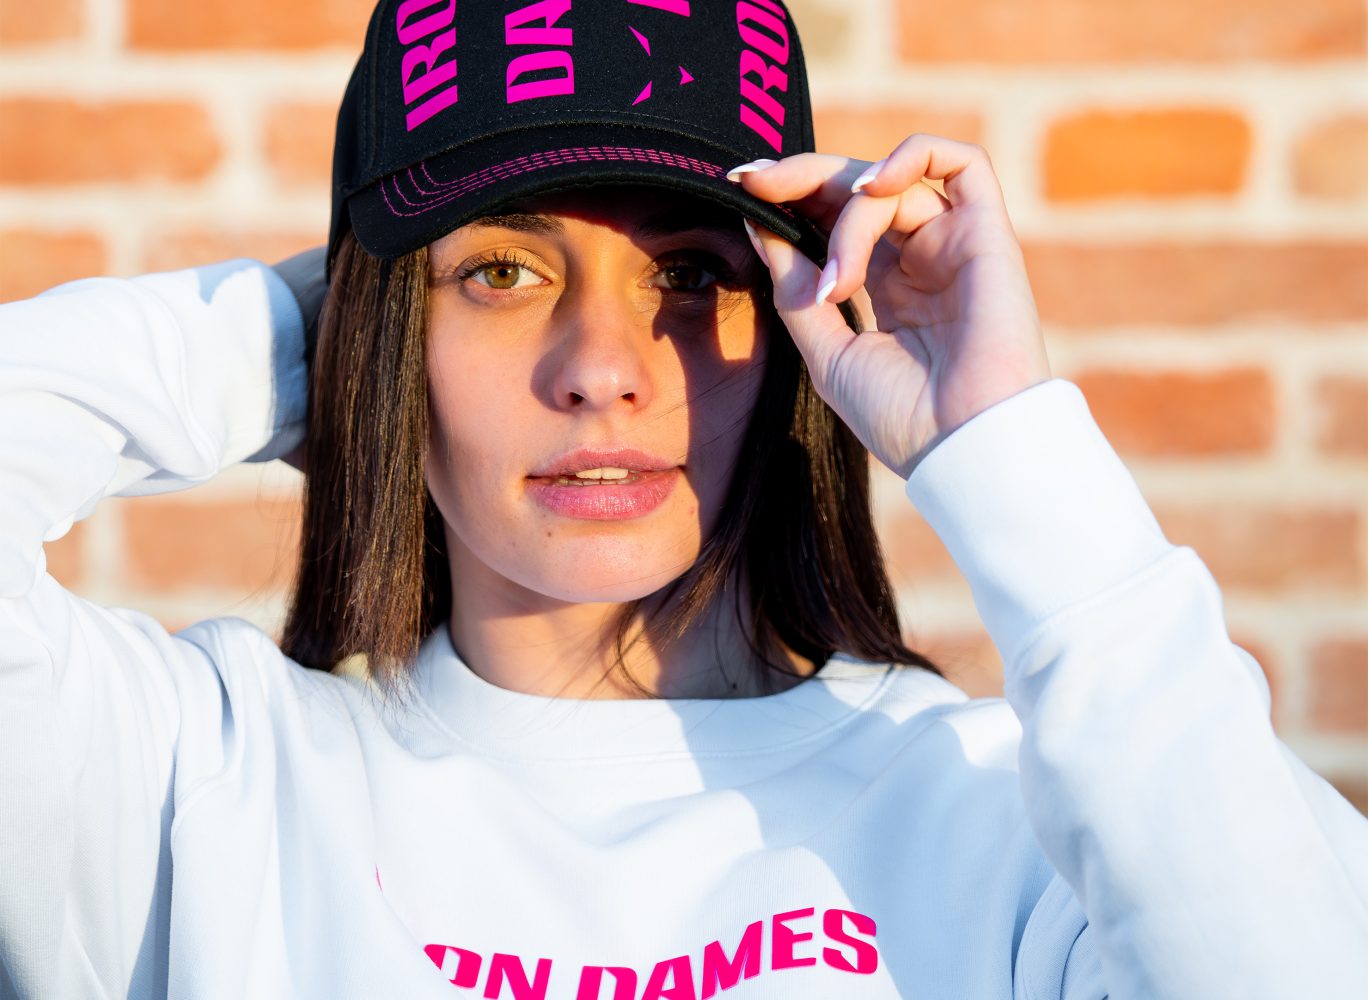 IRON DAMES WELCOMES MARTA GARCIA AS THE NEWEST ADDITION TO ITS WIDE RANGE OF TALENT